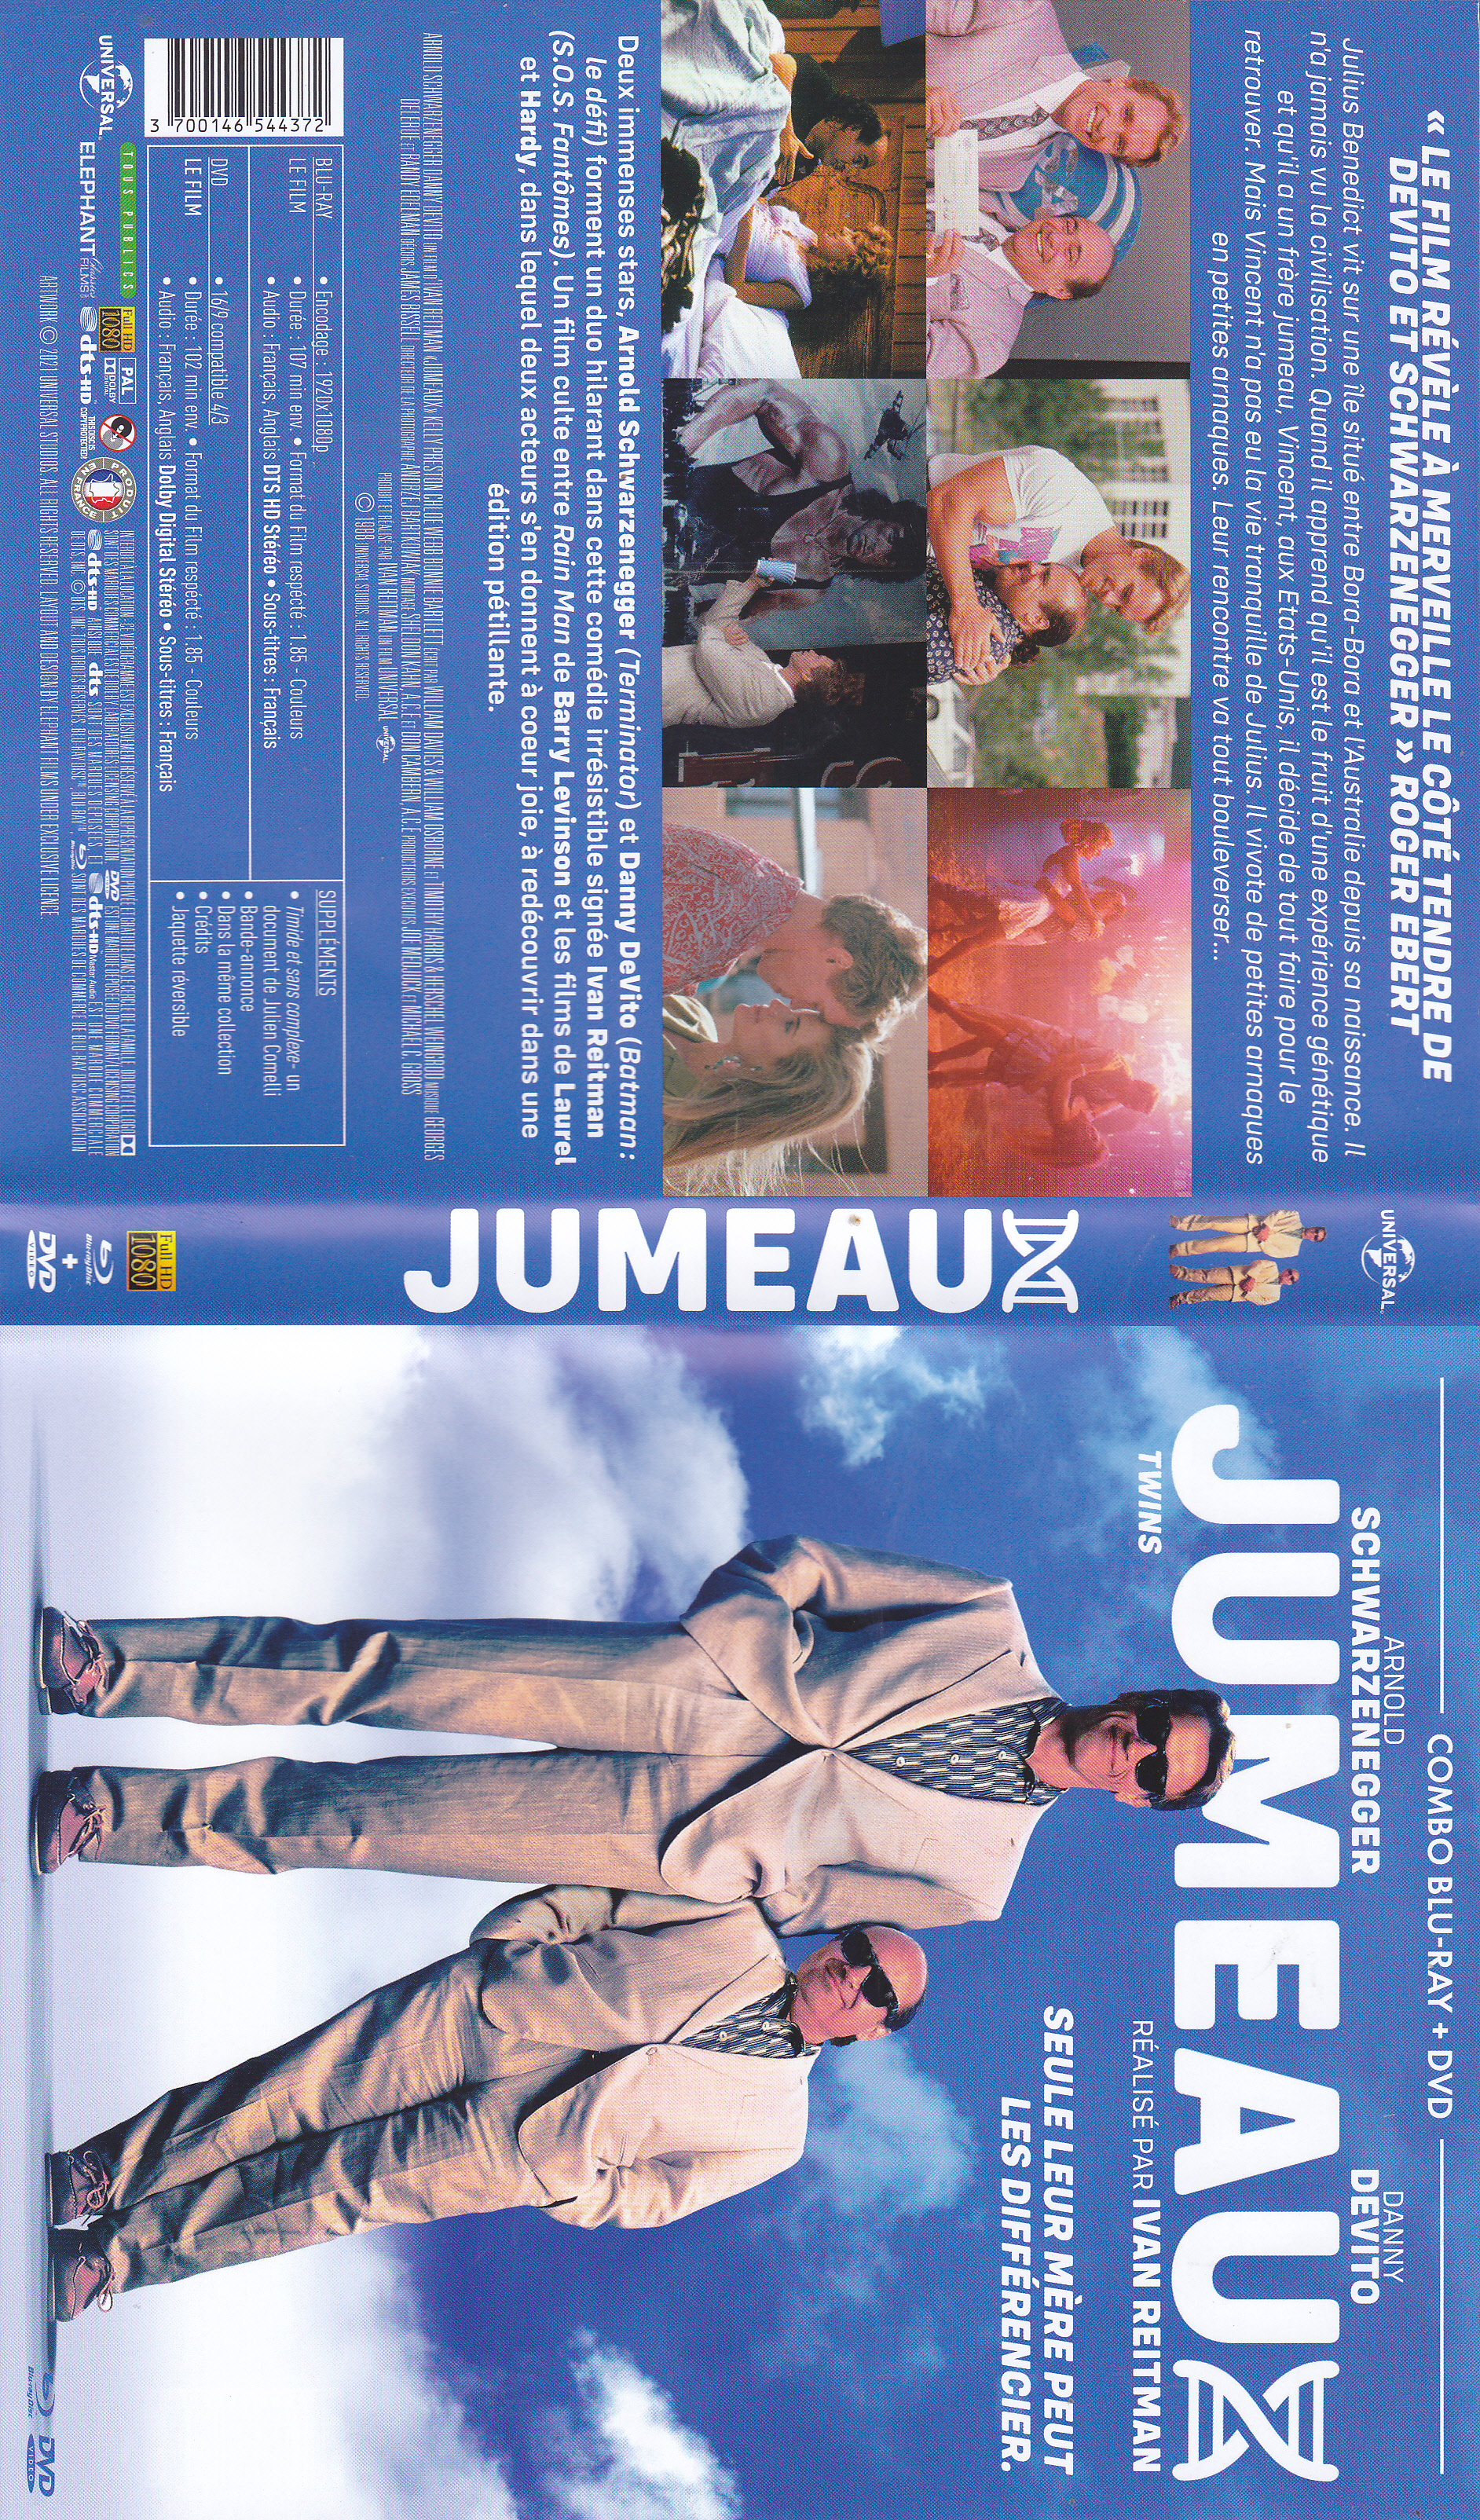 Jaquette DVD Jumeaux (BLU-RAY)